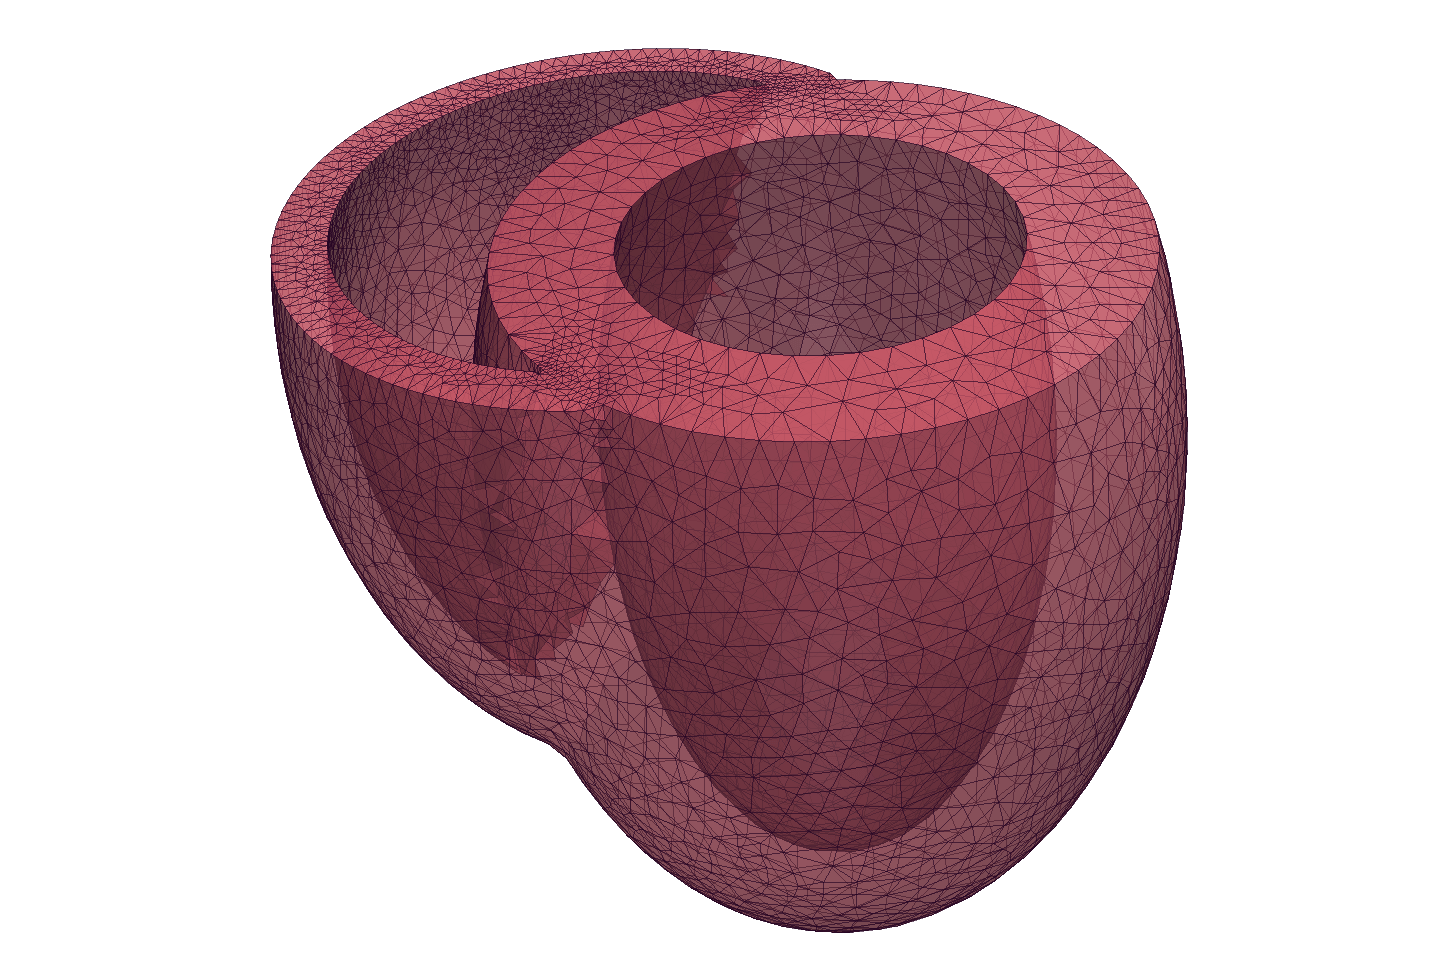 A finite element mesh of a generic biventricle generated with CGAL.